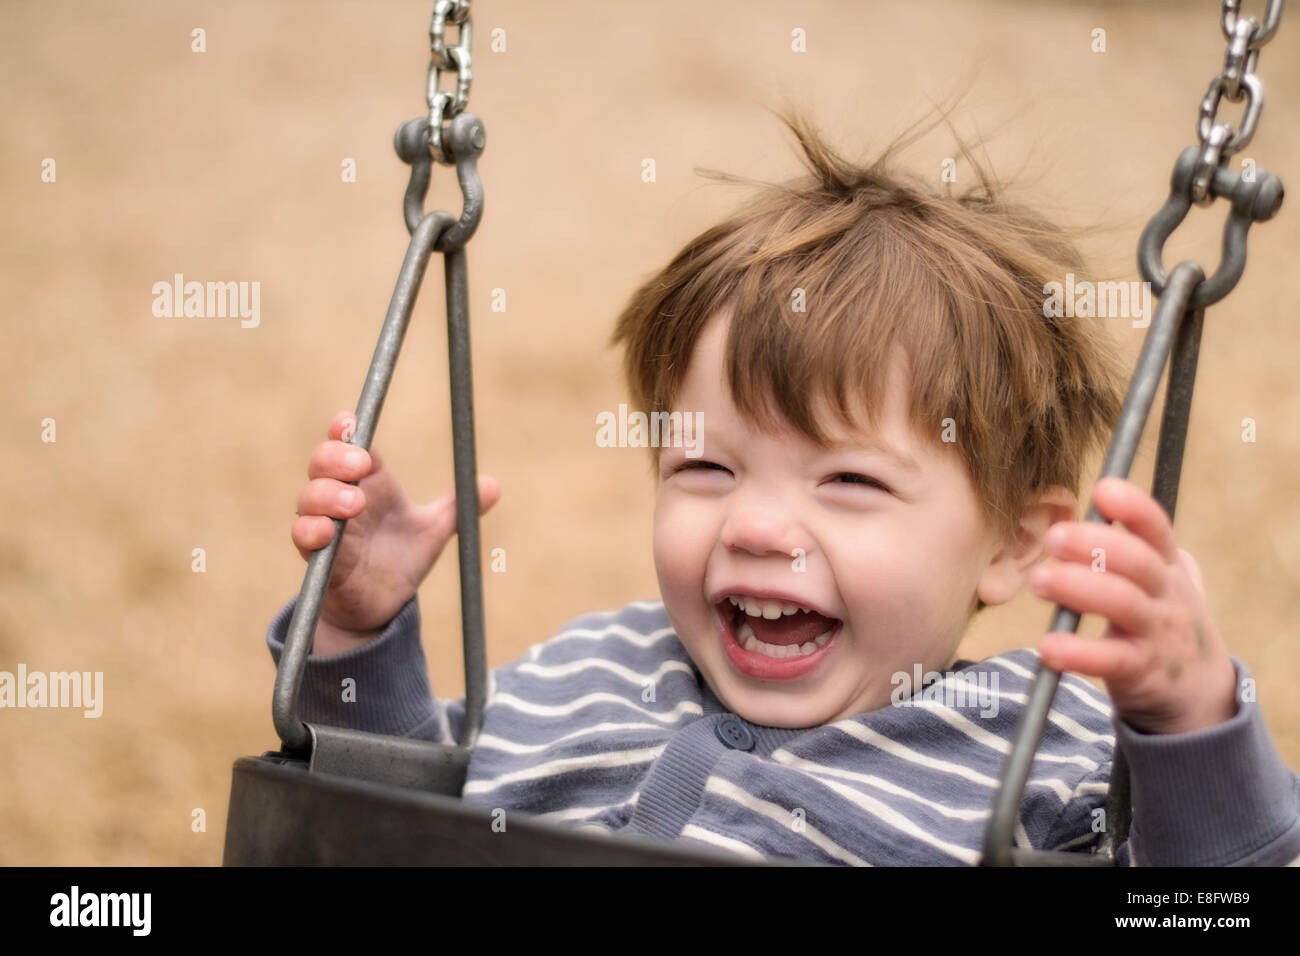 Portrait of a boy on a swing laughing Stock Photo